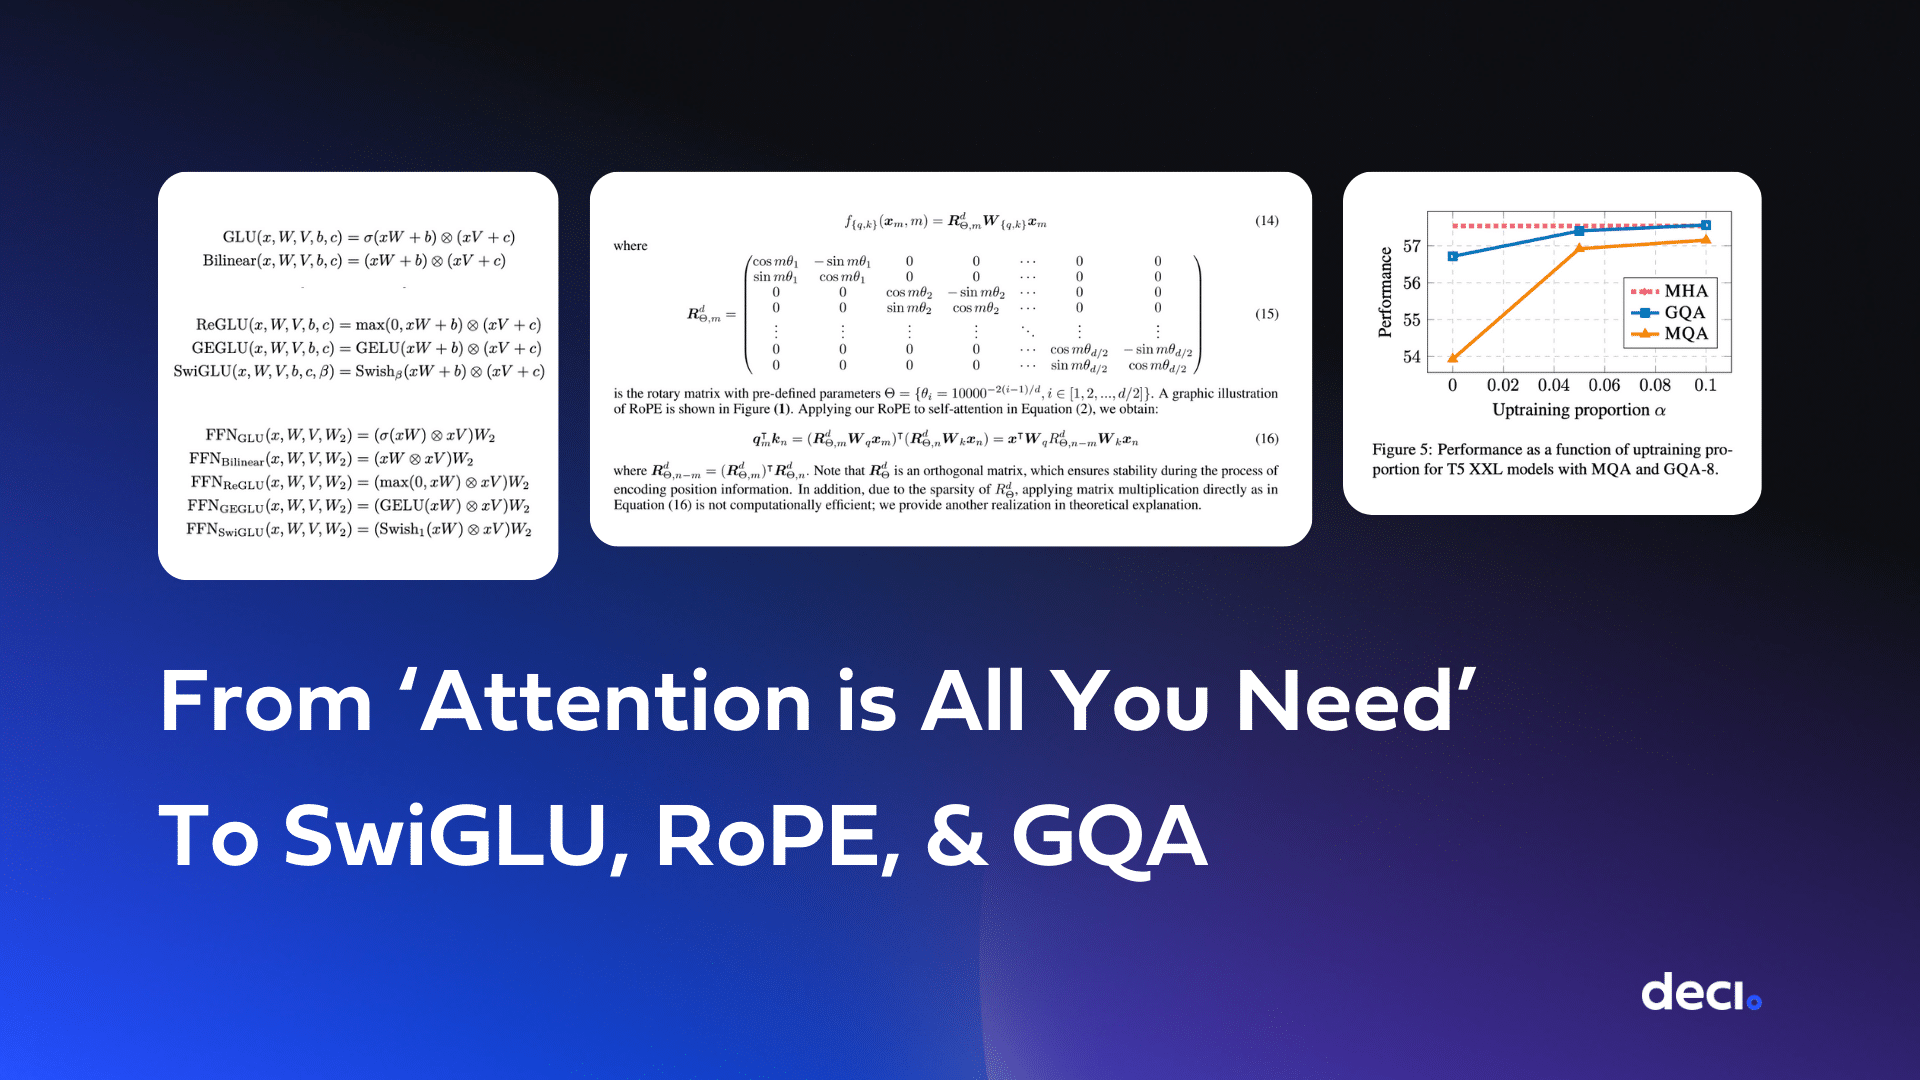 From Attention Is All You Need to SwiGLU, RoPE, and GQA